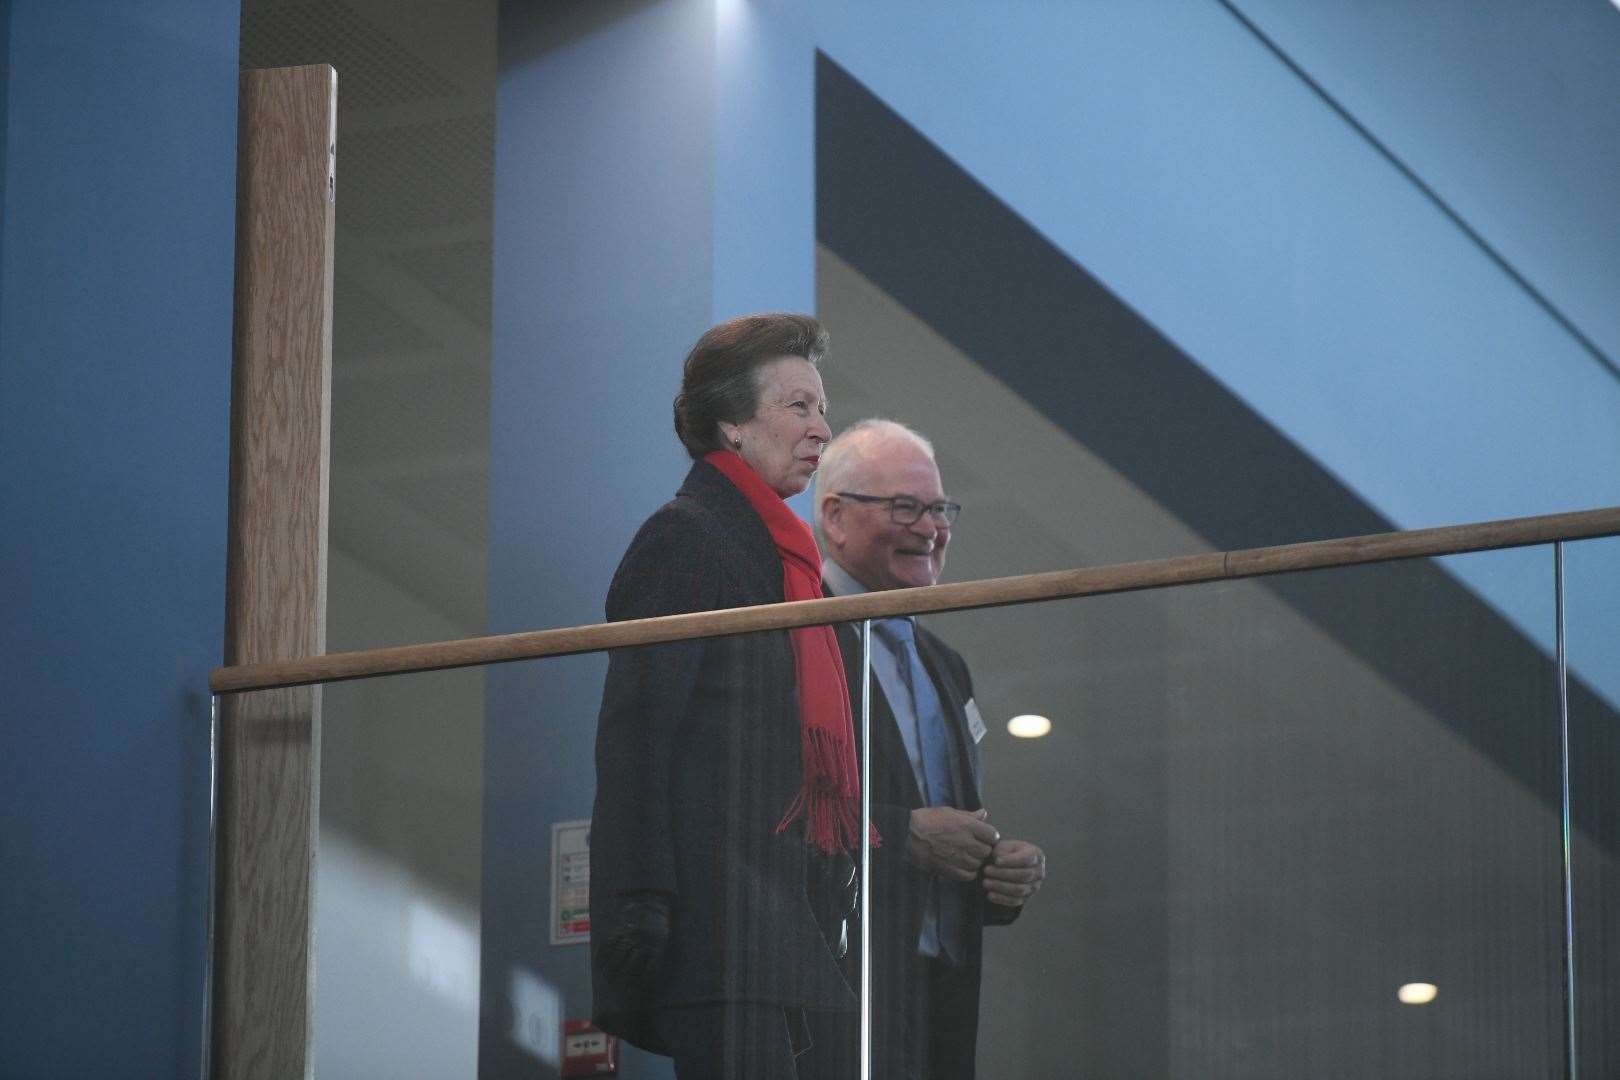 Princess Anne having a tour of the new Rural and Veterinary Innovation Centre.